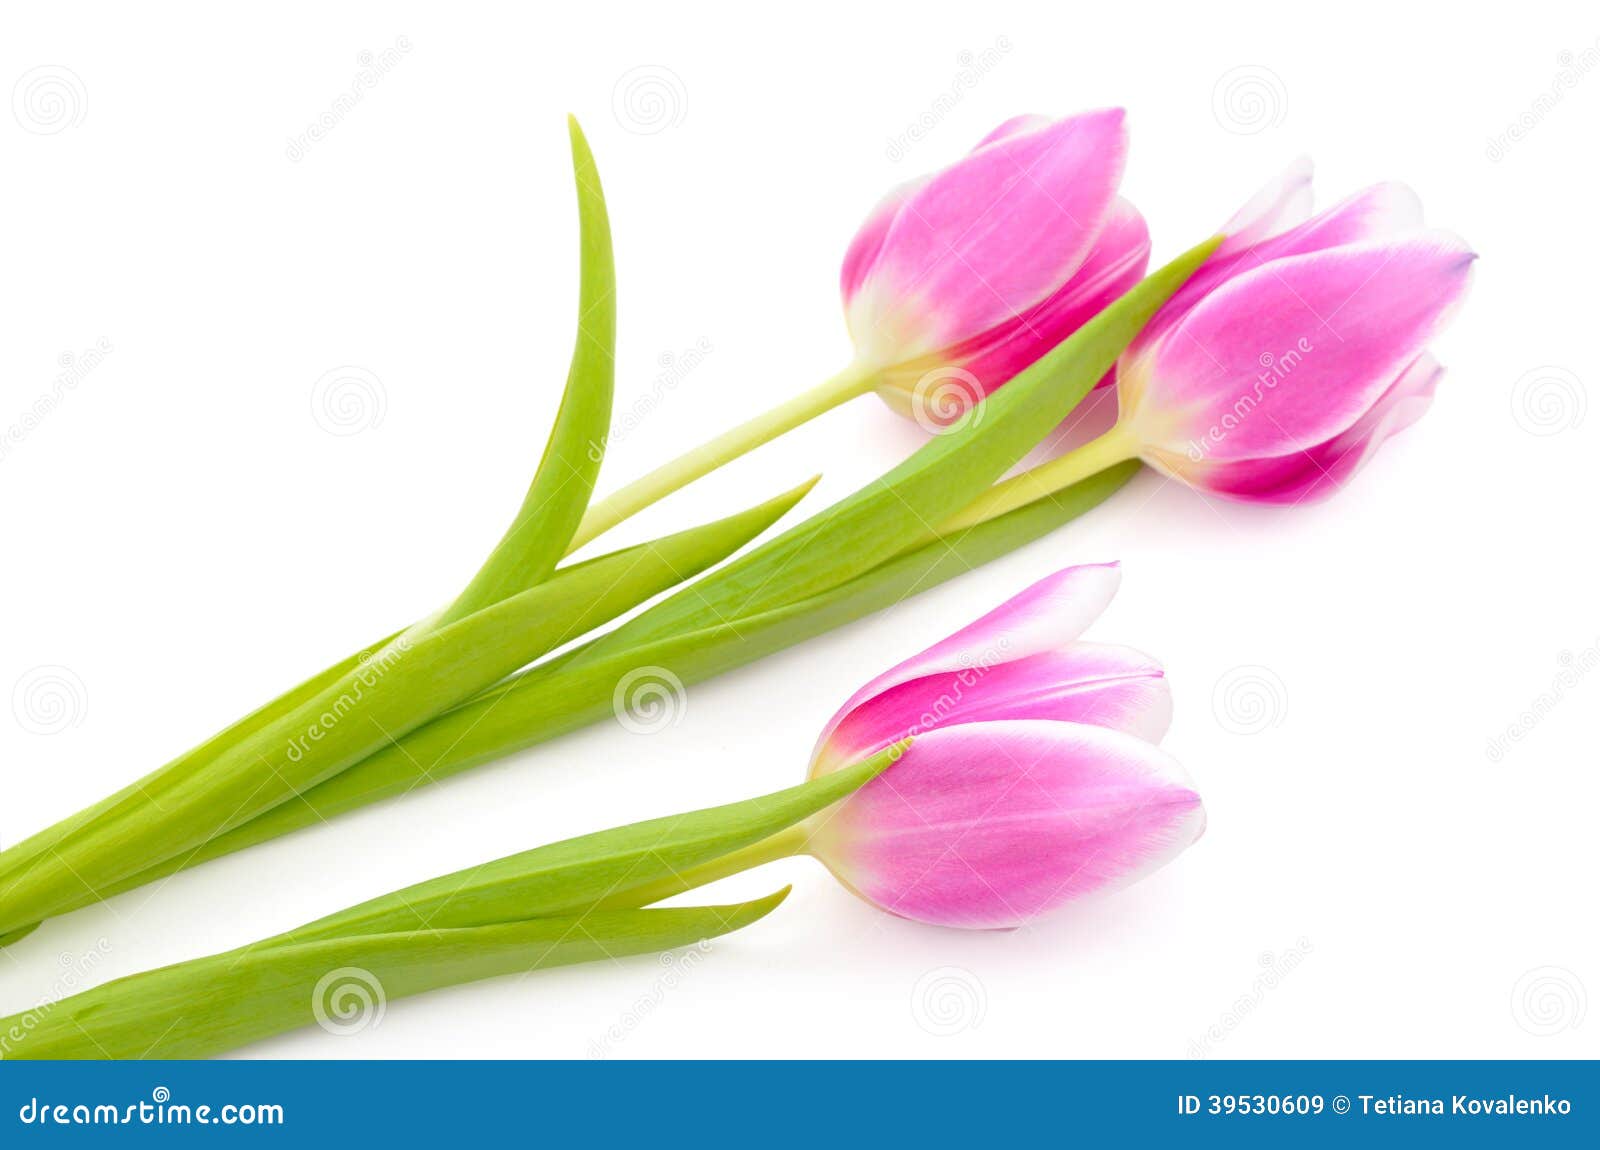 Pink tulips isolated stock image. Image of pink, leaf - 39530609